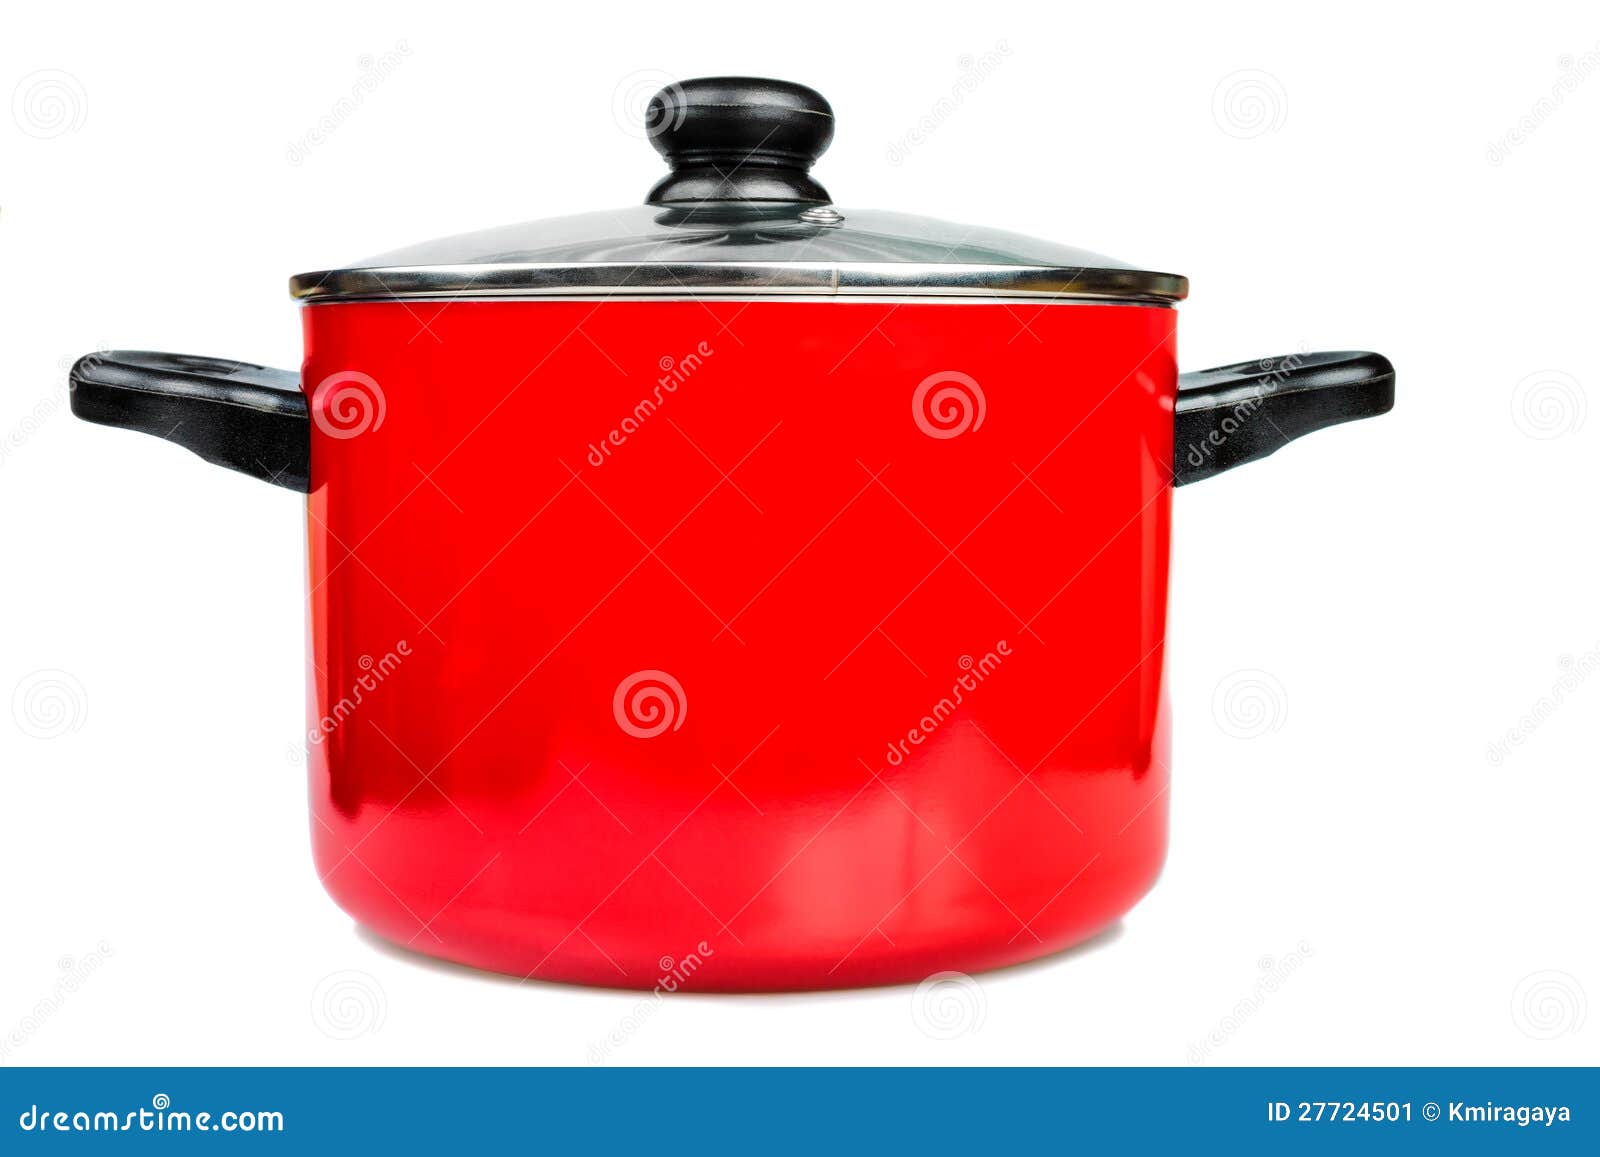 red cooking pot wit glass lid